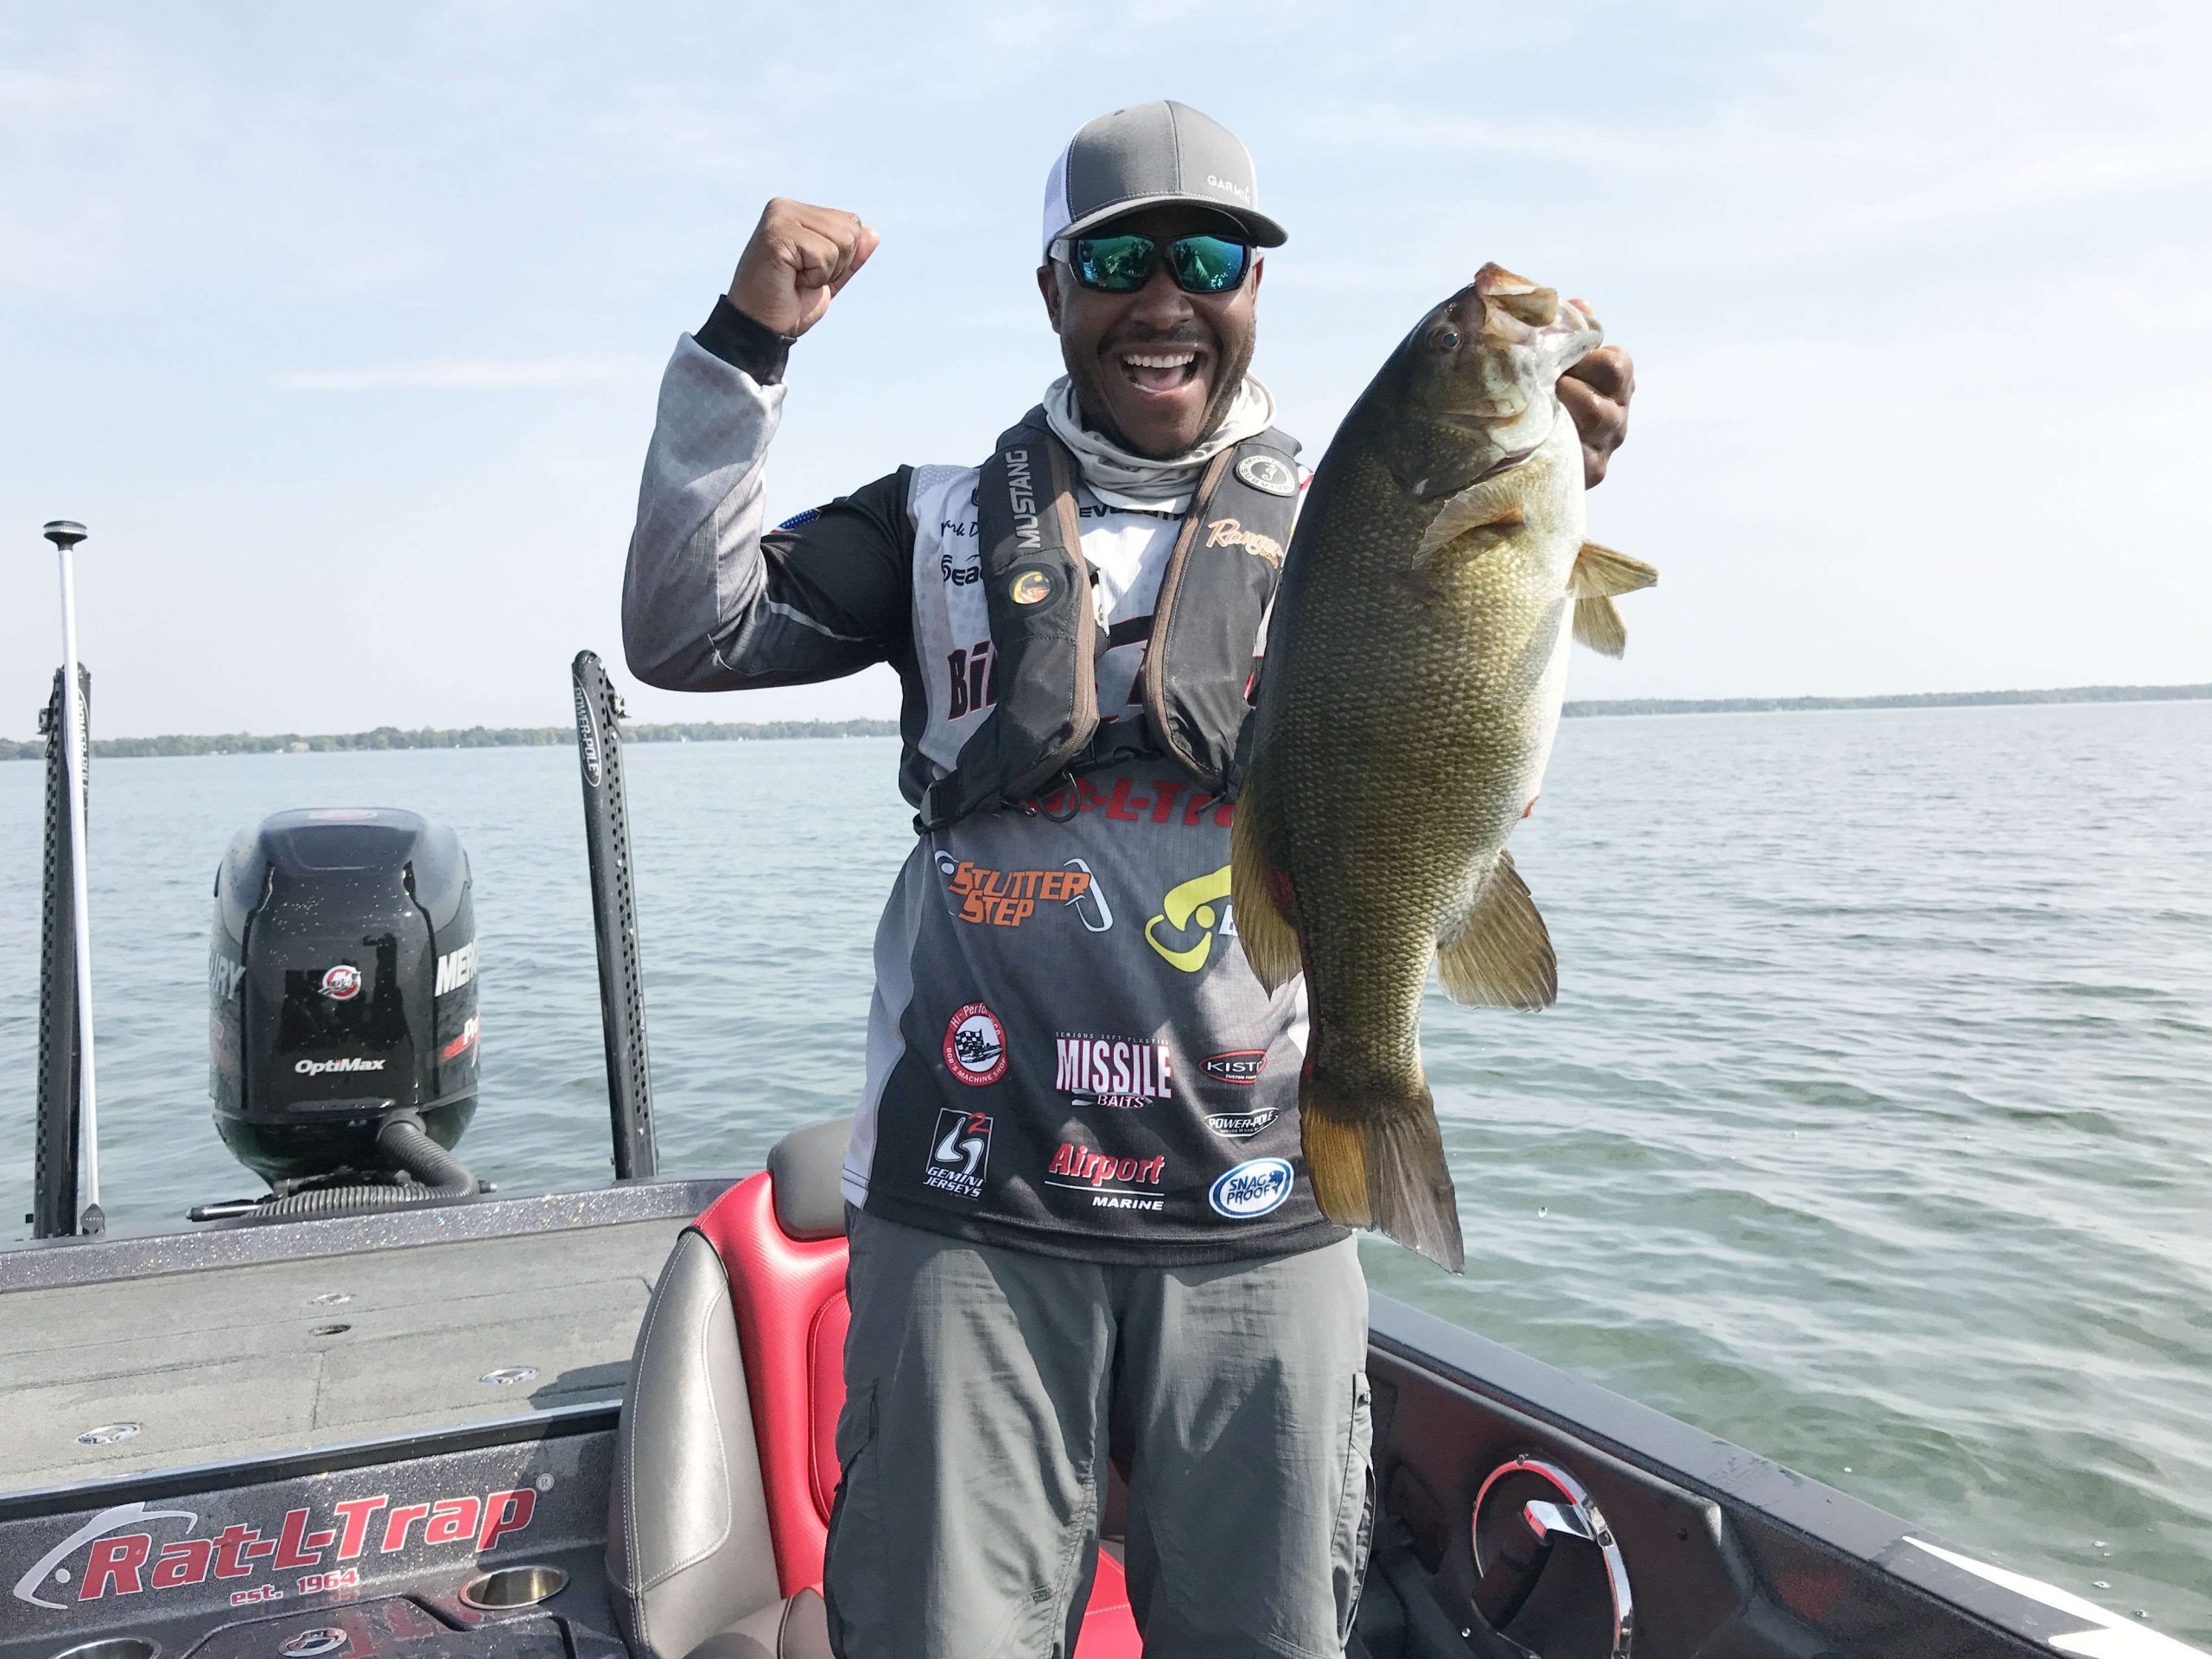 Patience pays off. After fishing the same spot three different times throughout the day comes the biggest catch of the day for Mark Daniels Jr.